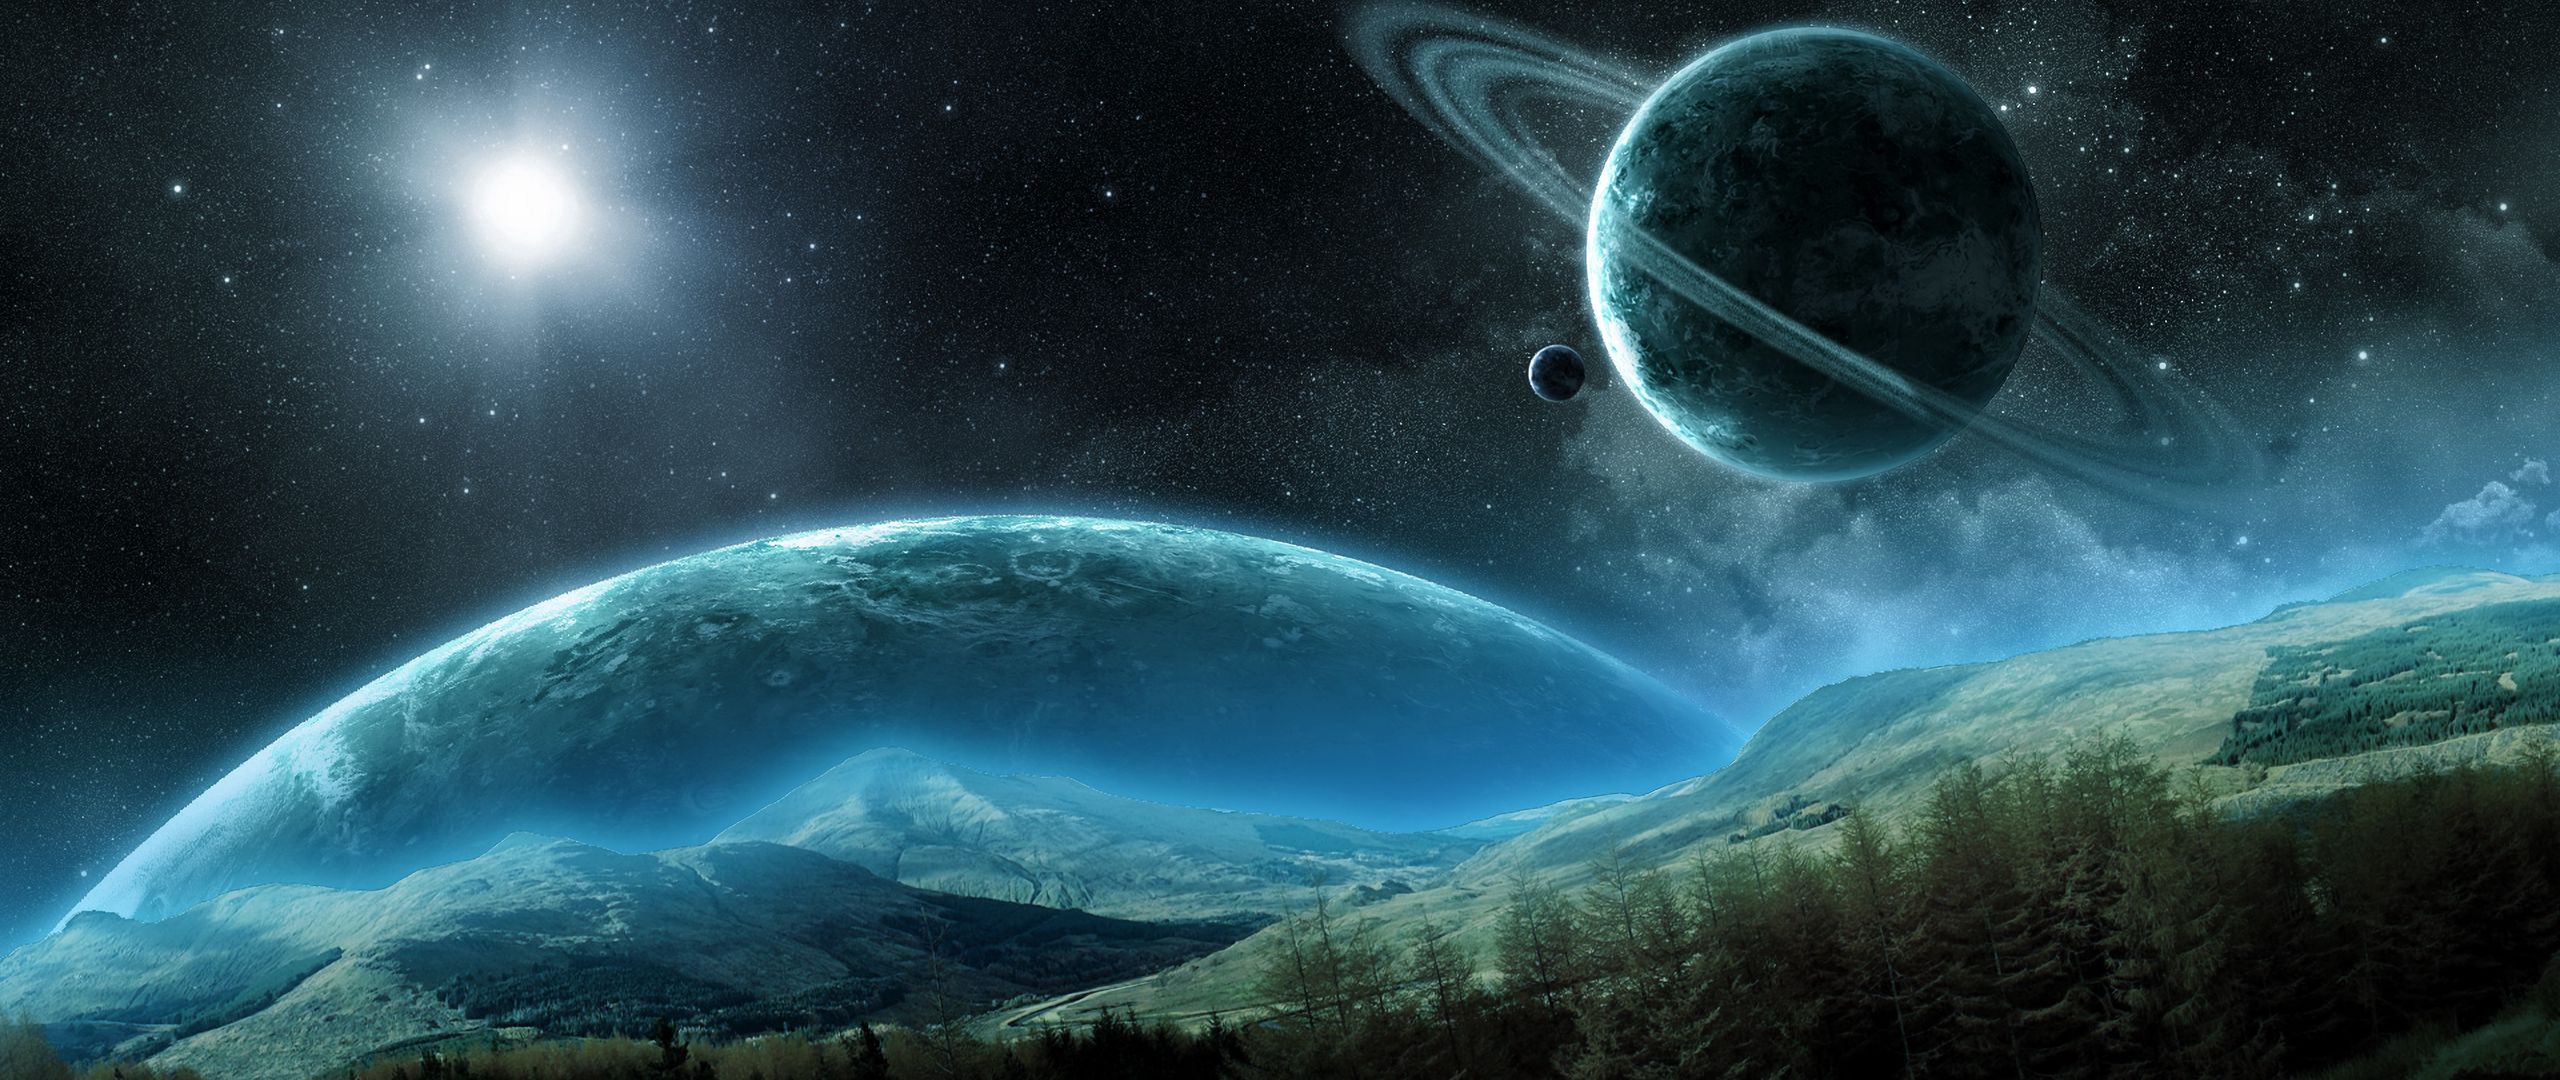 Download wallpaper 2560x1080 planet, saturn, satellite, rings, space, night dual  wide 1080p hd background